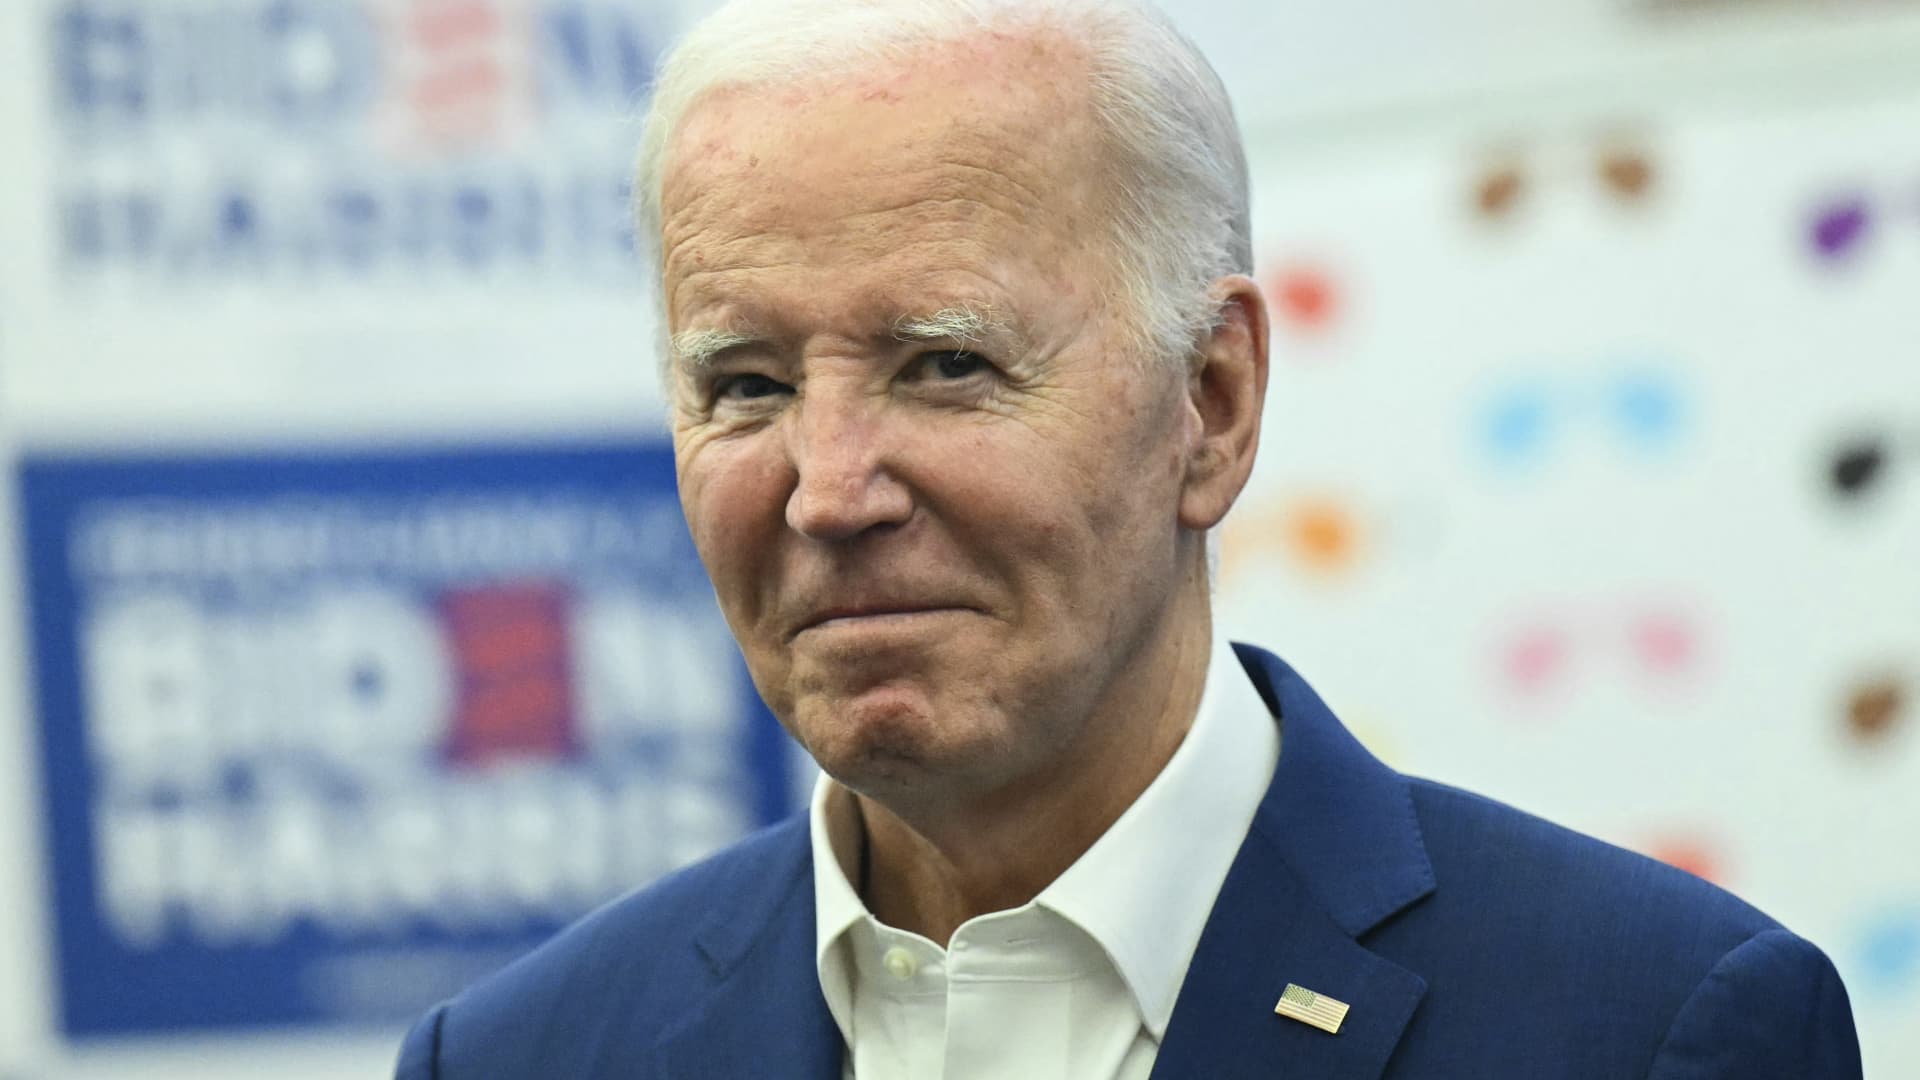 The chance that Biden will withdraw from the presidential election is 40%, Stifel says